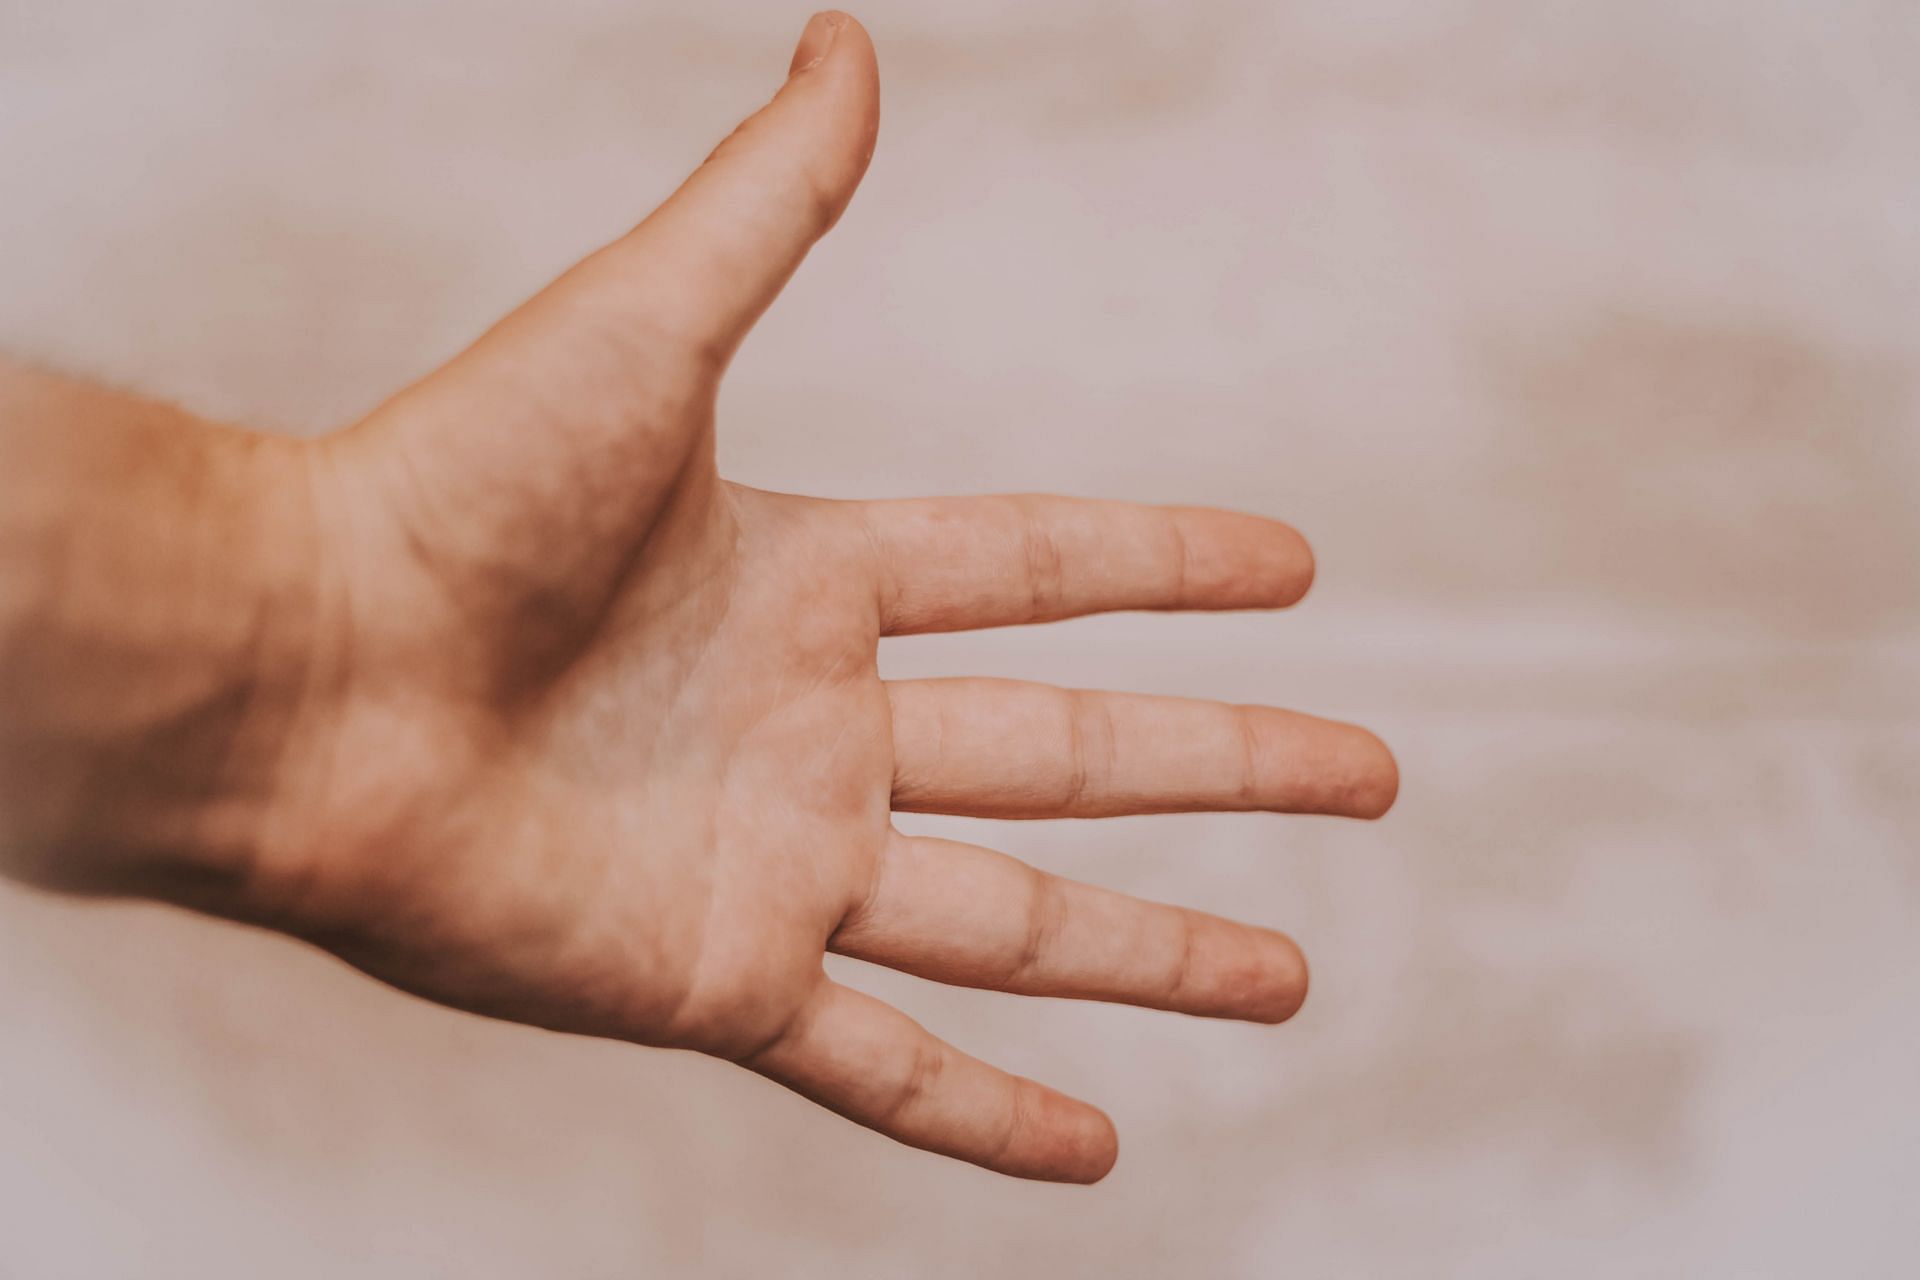 Cold fingers are most common in this condition (Image via Unsplash/Mathias Reding)